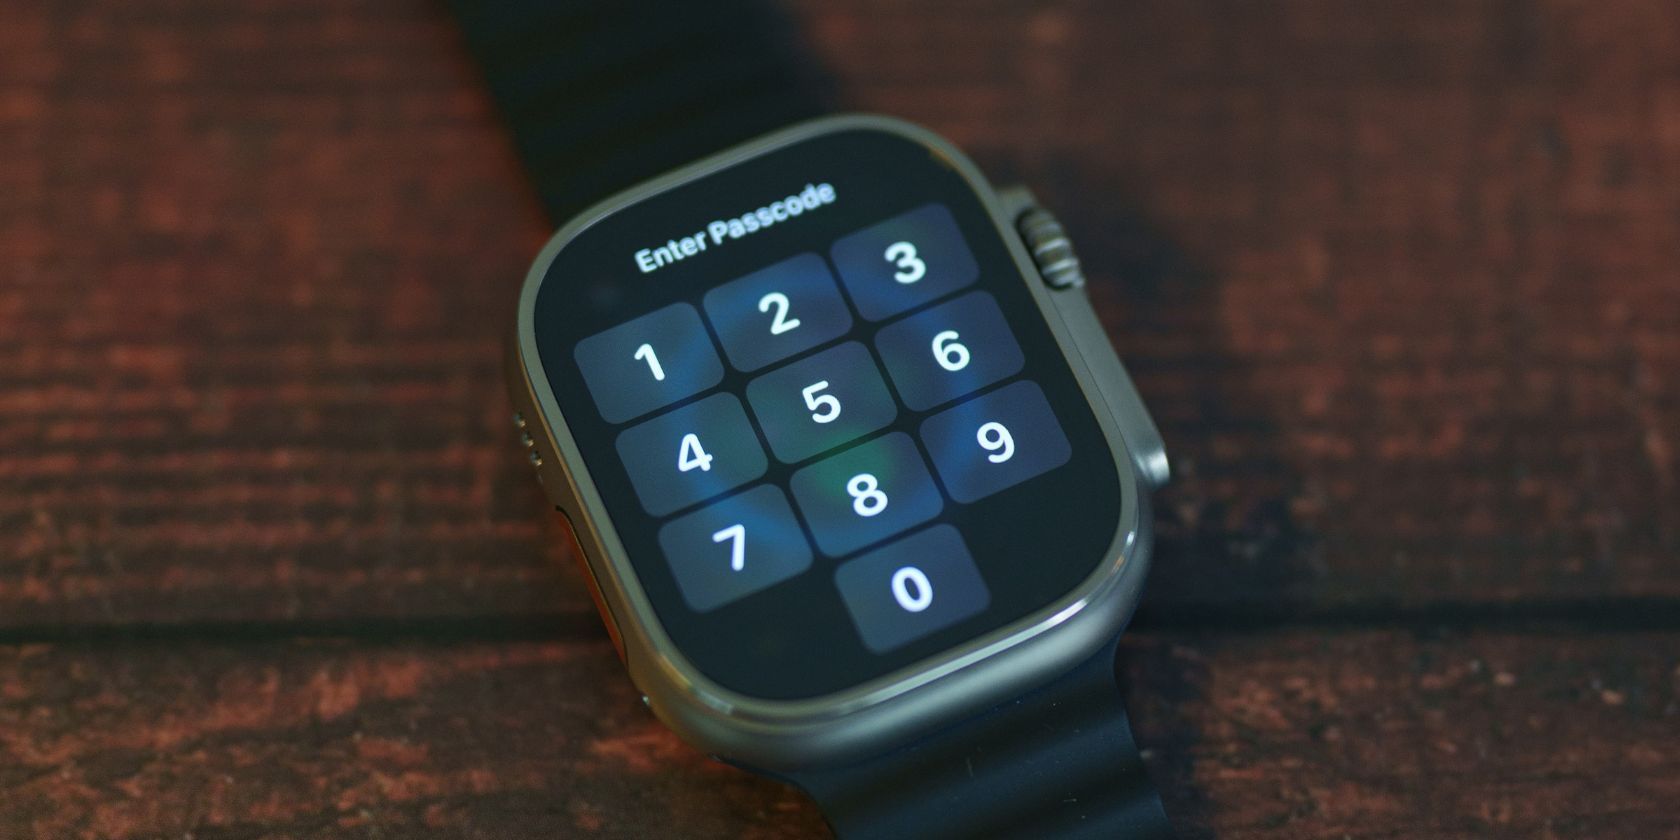 smartwatch on table displaying lock screen